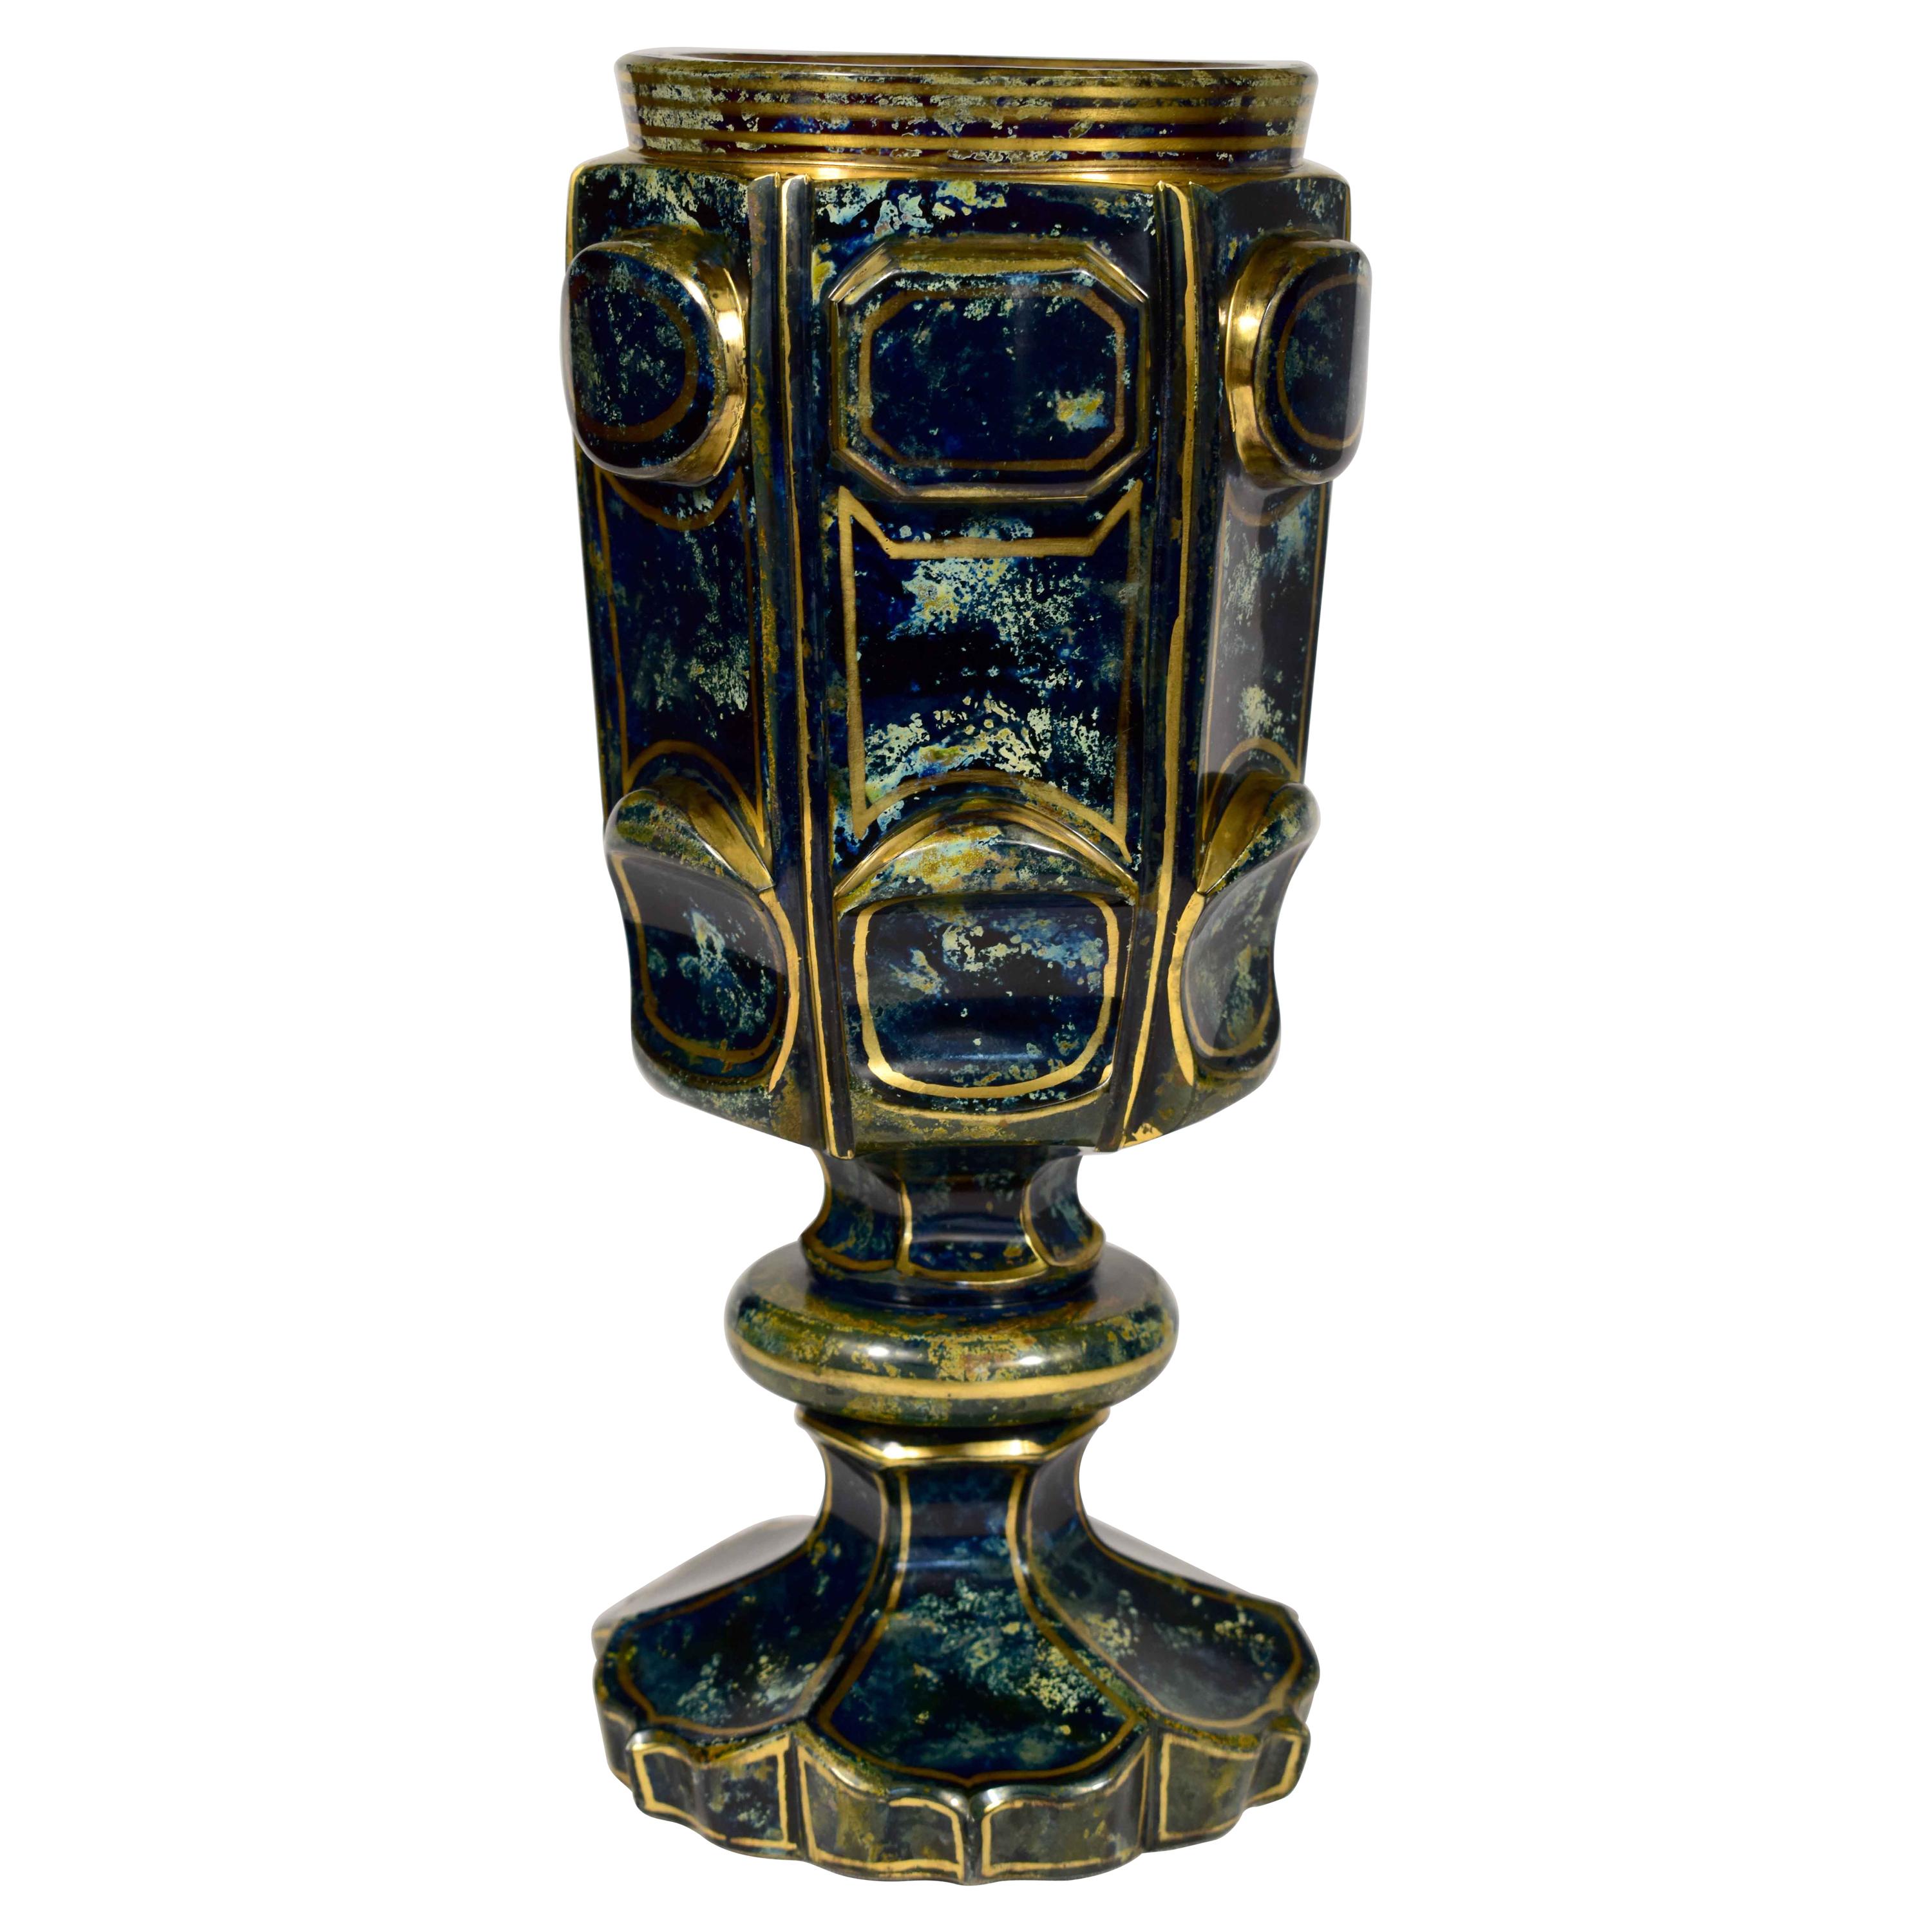 Lithyalin Glass Goblet, Unique, 19th Century, Engraved Gilded, Bohemian Glass